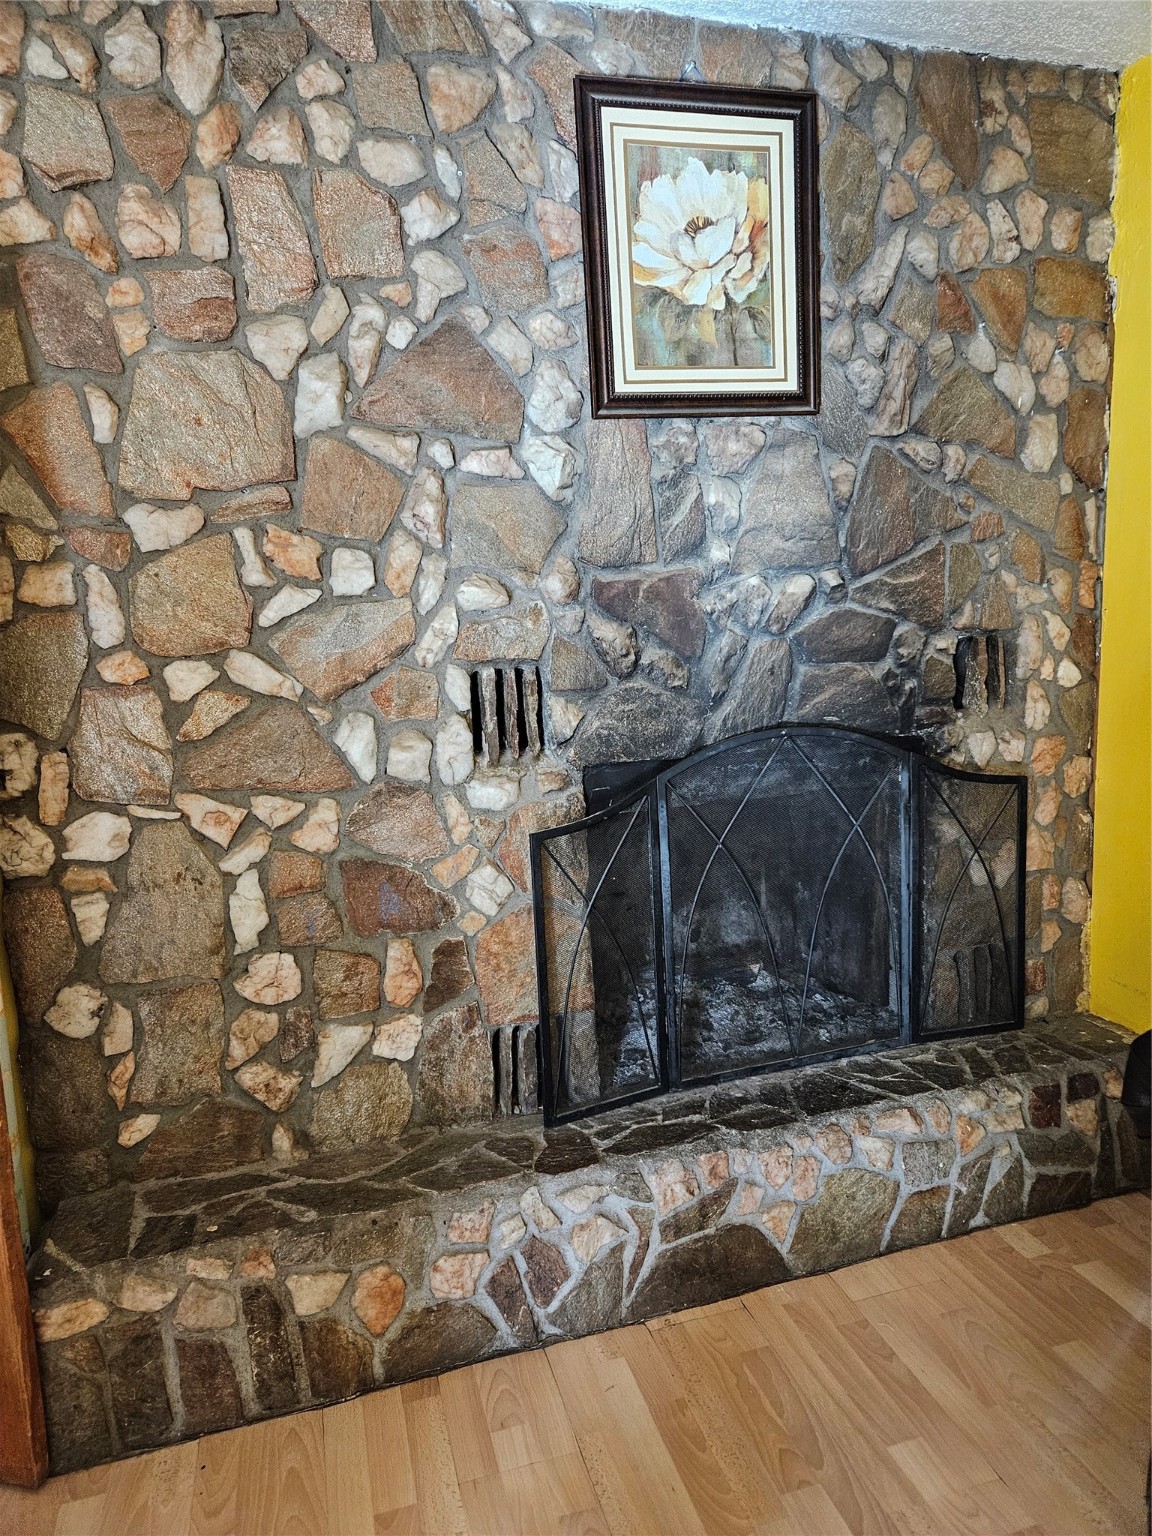 Fireplace in Unit B